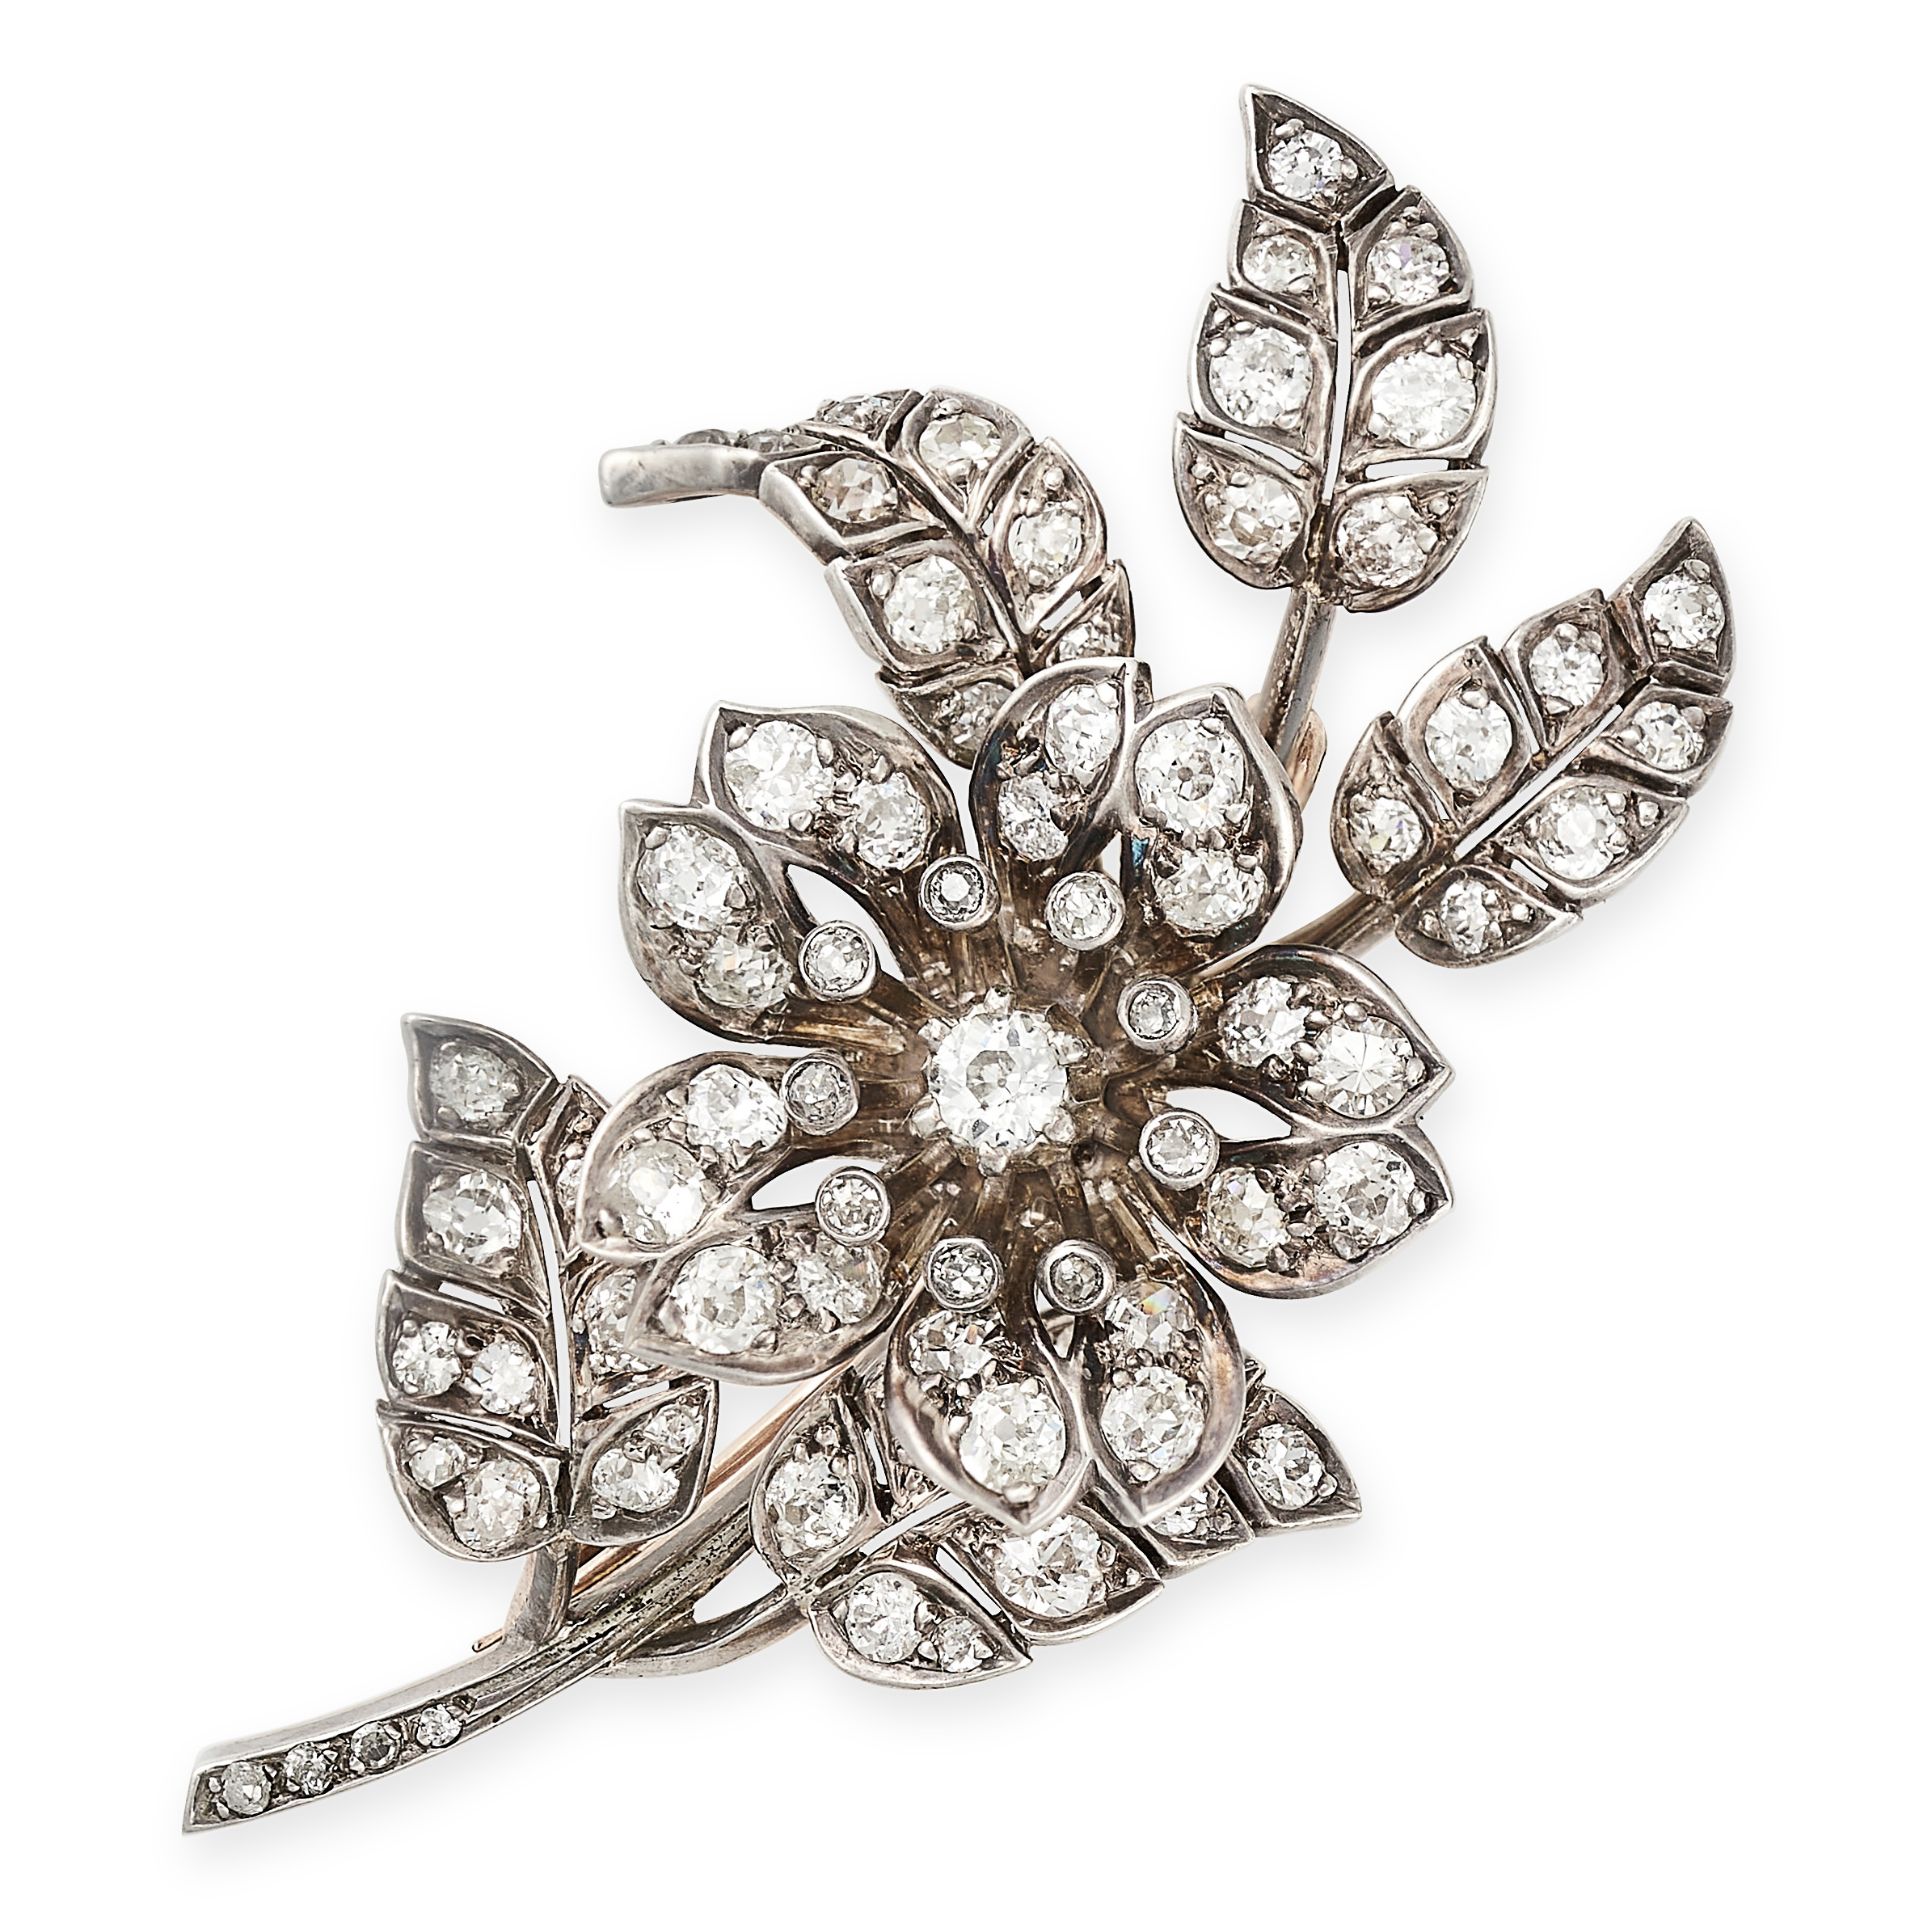 AN ANTIQUE DIAMOND FLOWER BROOCH in silver and yellow gold, the brooch designed as a floral spray...